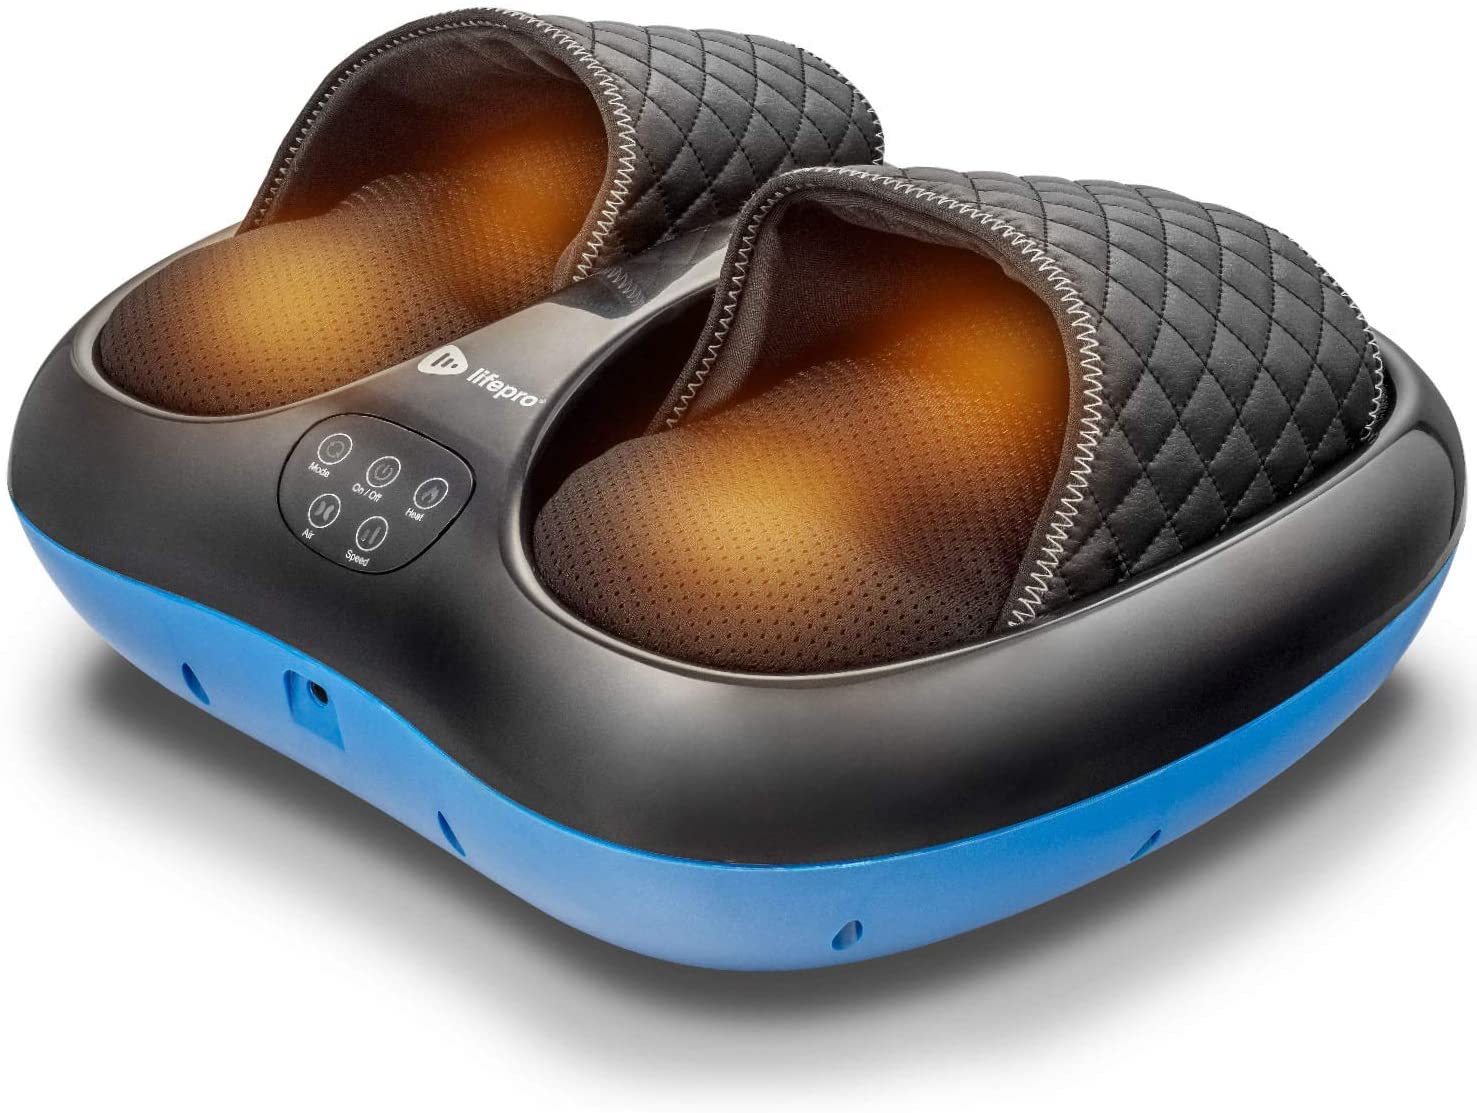 Best Foot Massager For Peripheral Neuropathy